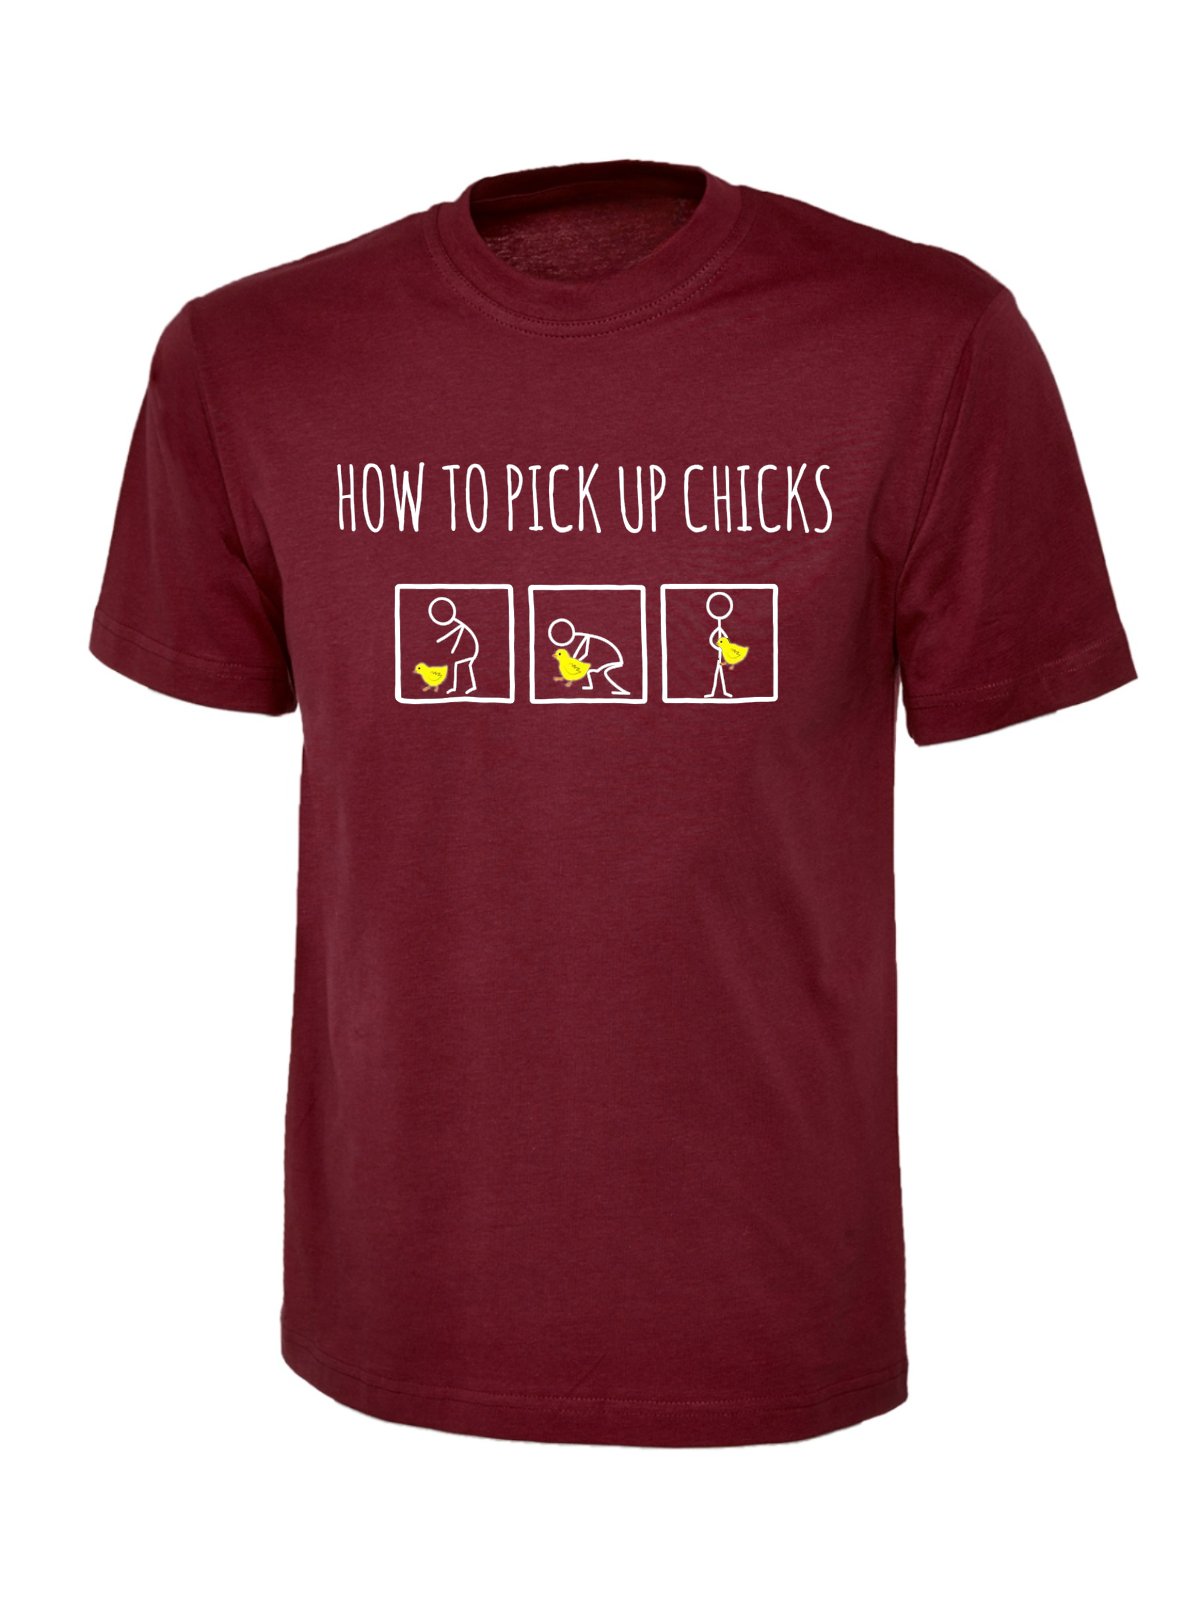 "How To Pick Chicks" Tee - Wow T-Shirts